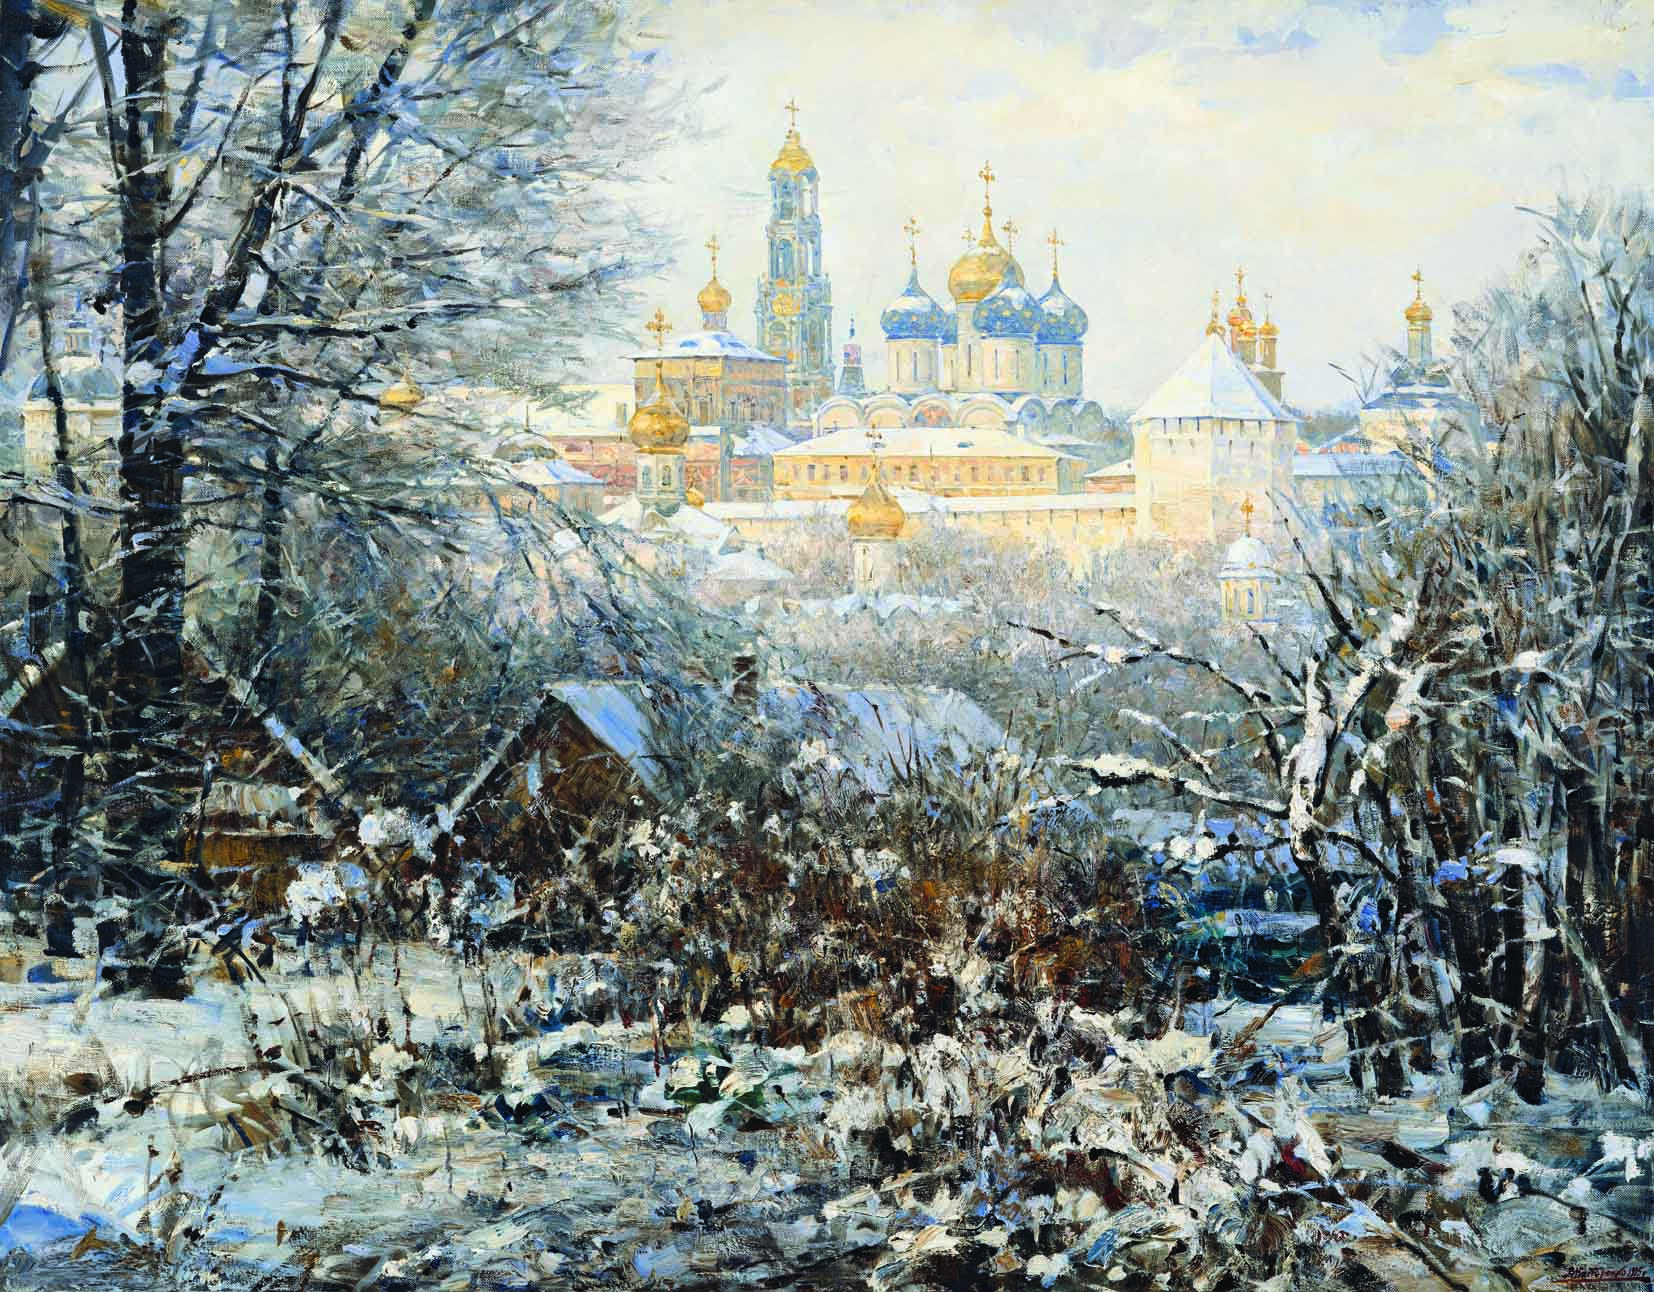 The Seasons. Winter in the Holy Trinity St. Sergius Lavra